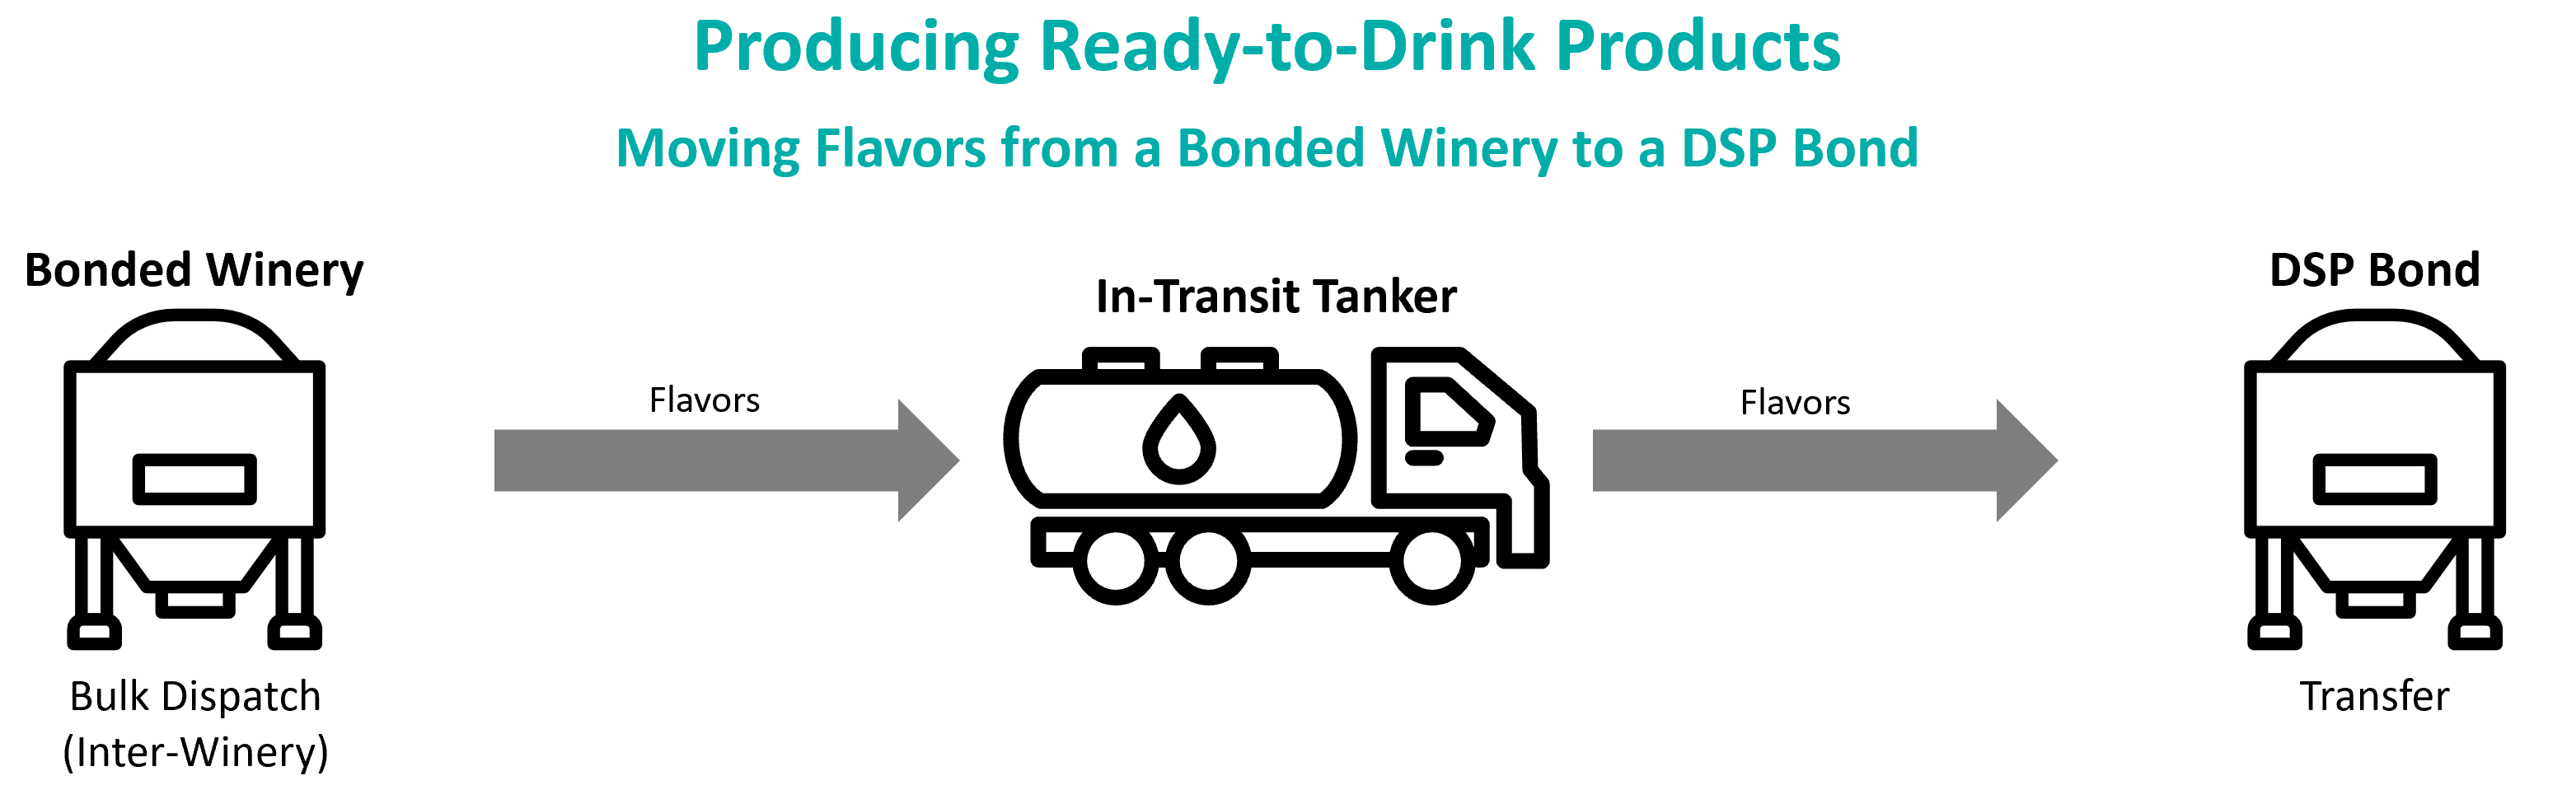 Diagram - Ready to Drink - Moving Flavors from Bonded to DSP 20230904.png